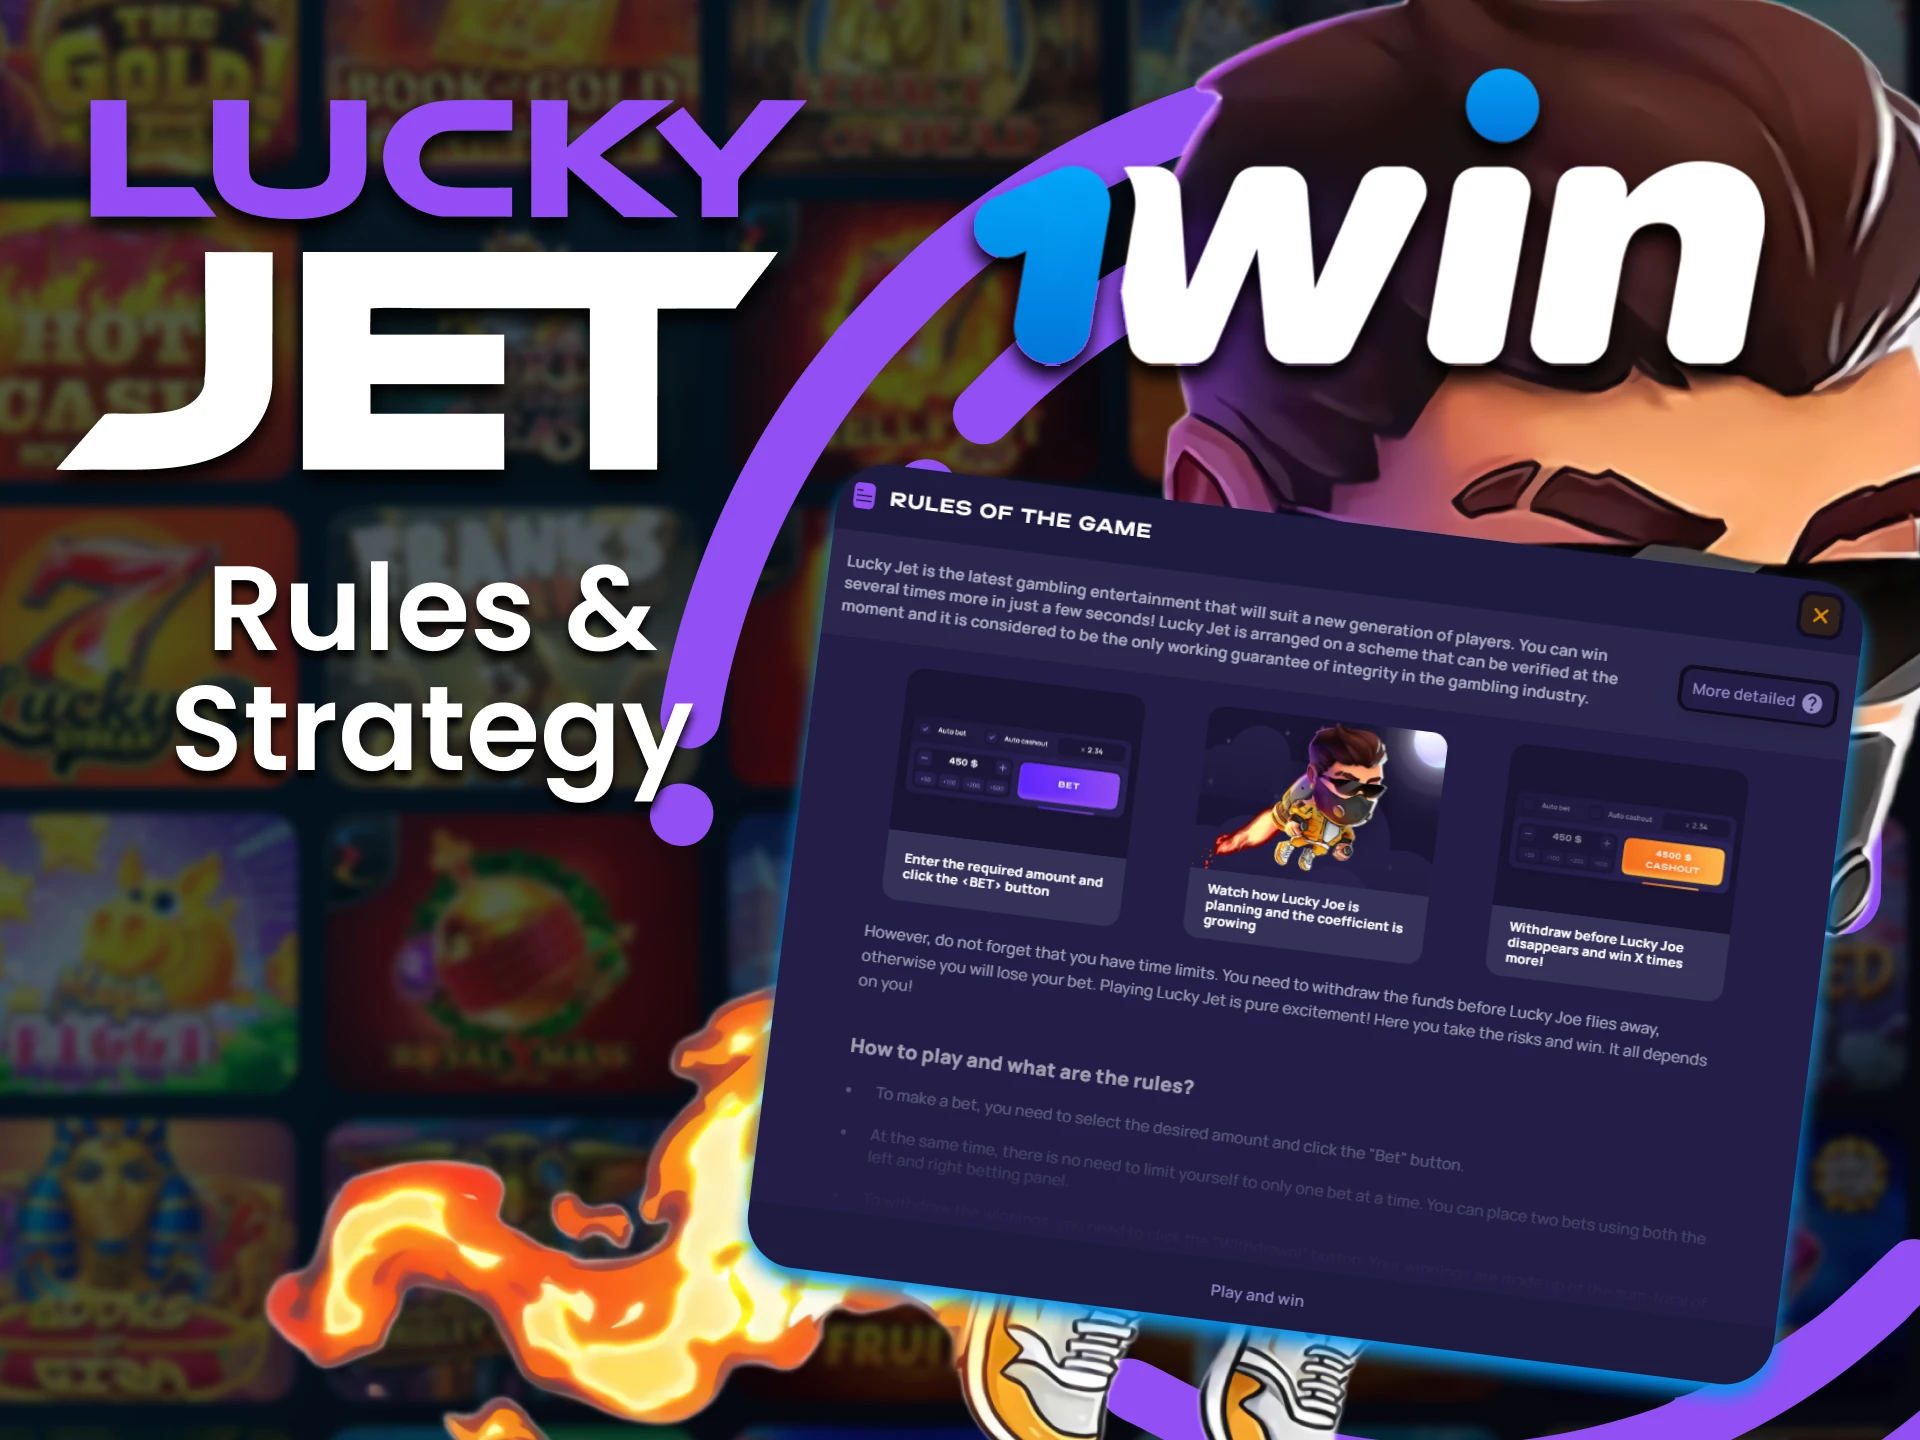 Learn and choose your winning strategy in Lucky Jet on 1win.